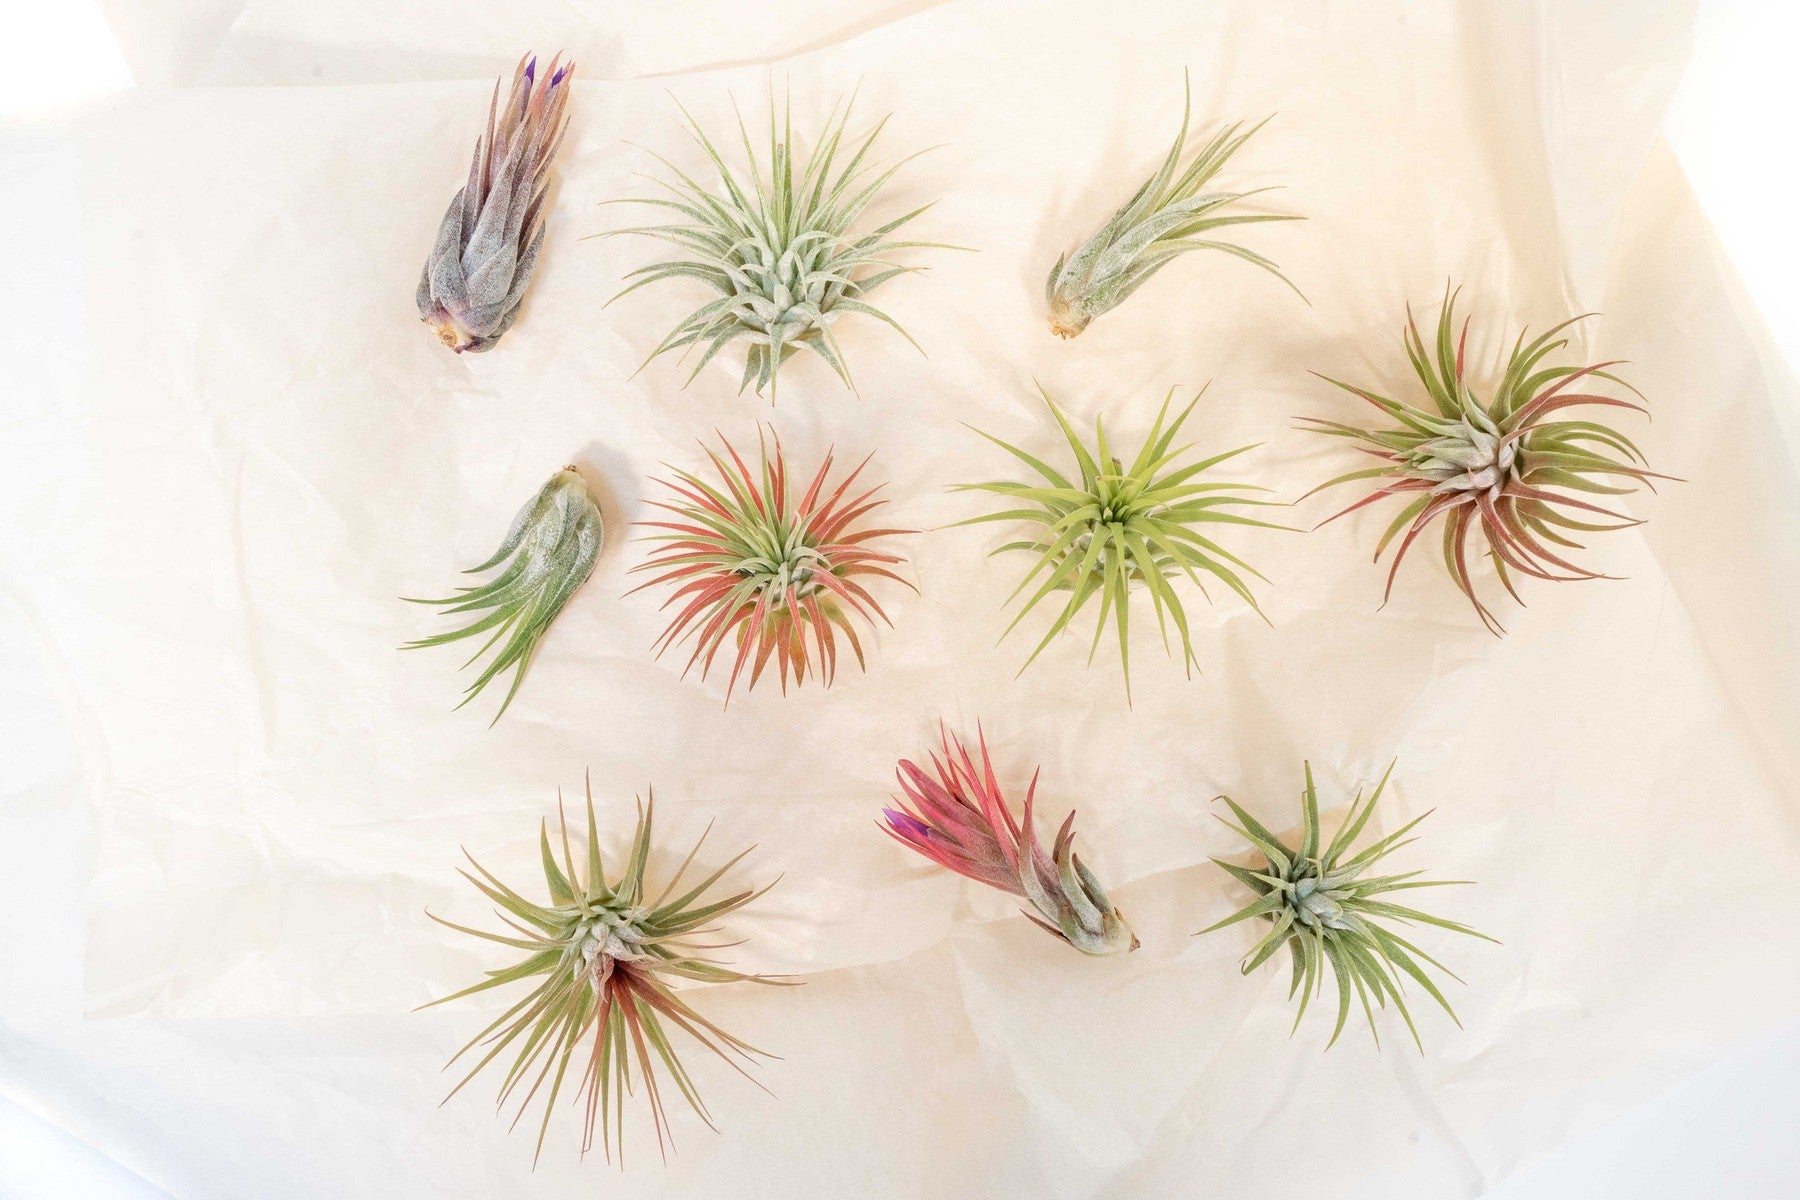 SALE - Tillandsia Ionantha Air Plant Super Packs - Set of 20, 30 or 50 - 70% Off-airplant-The Succulent Source